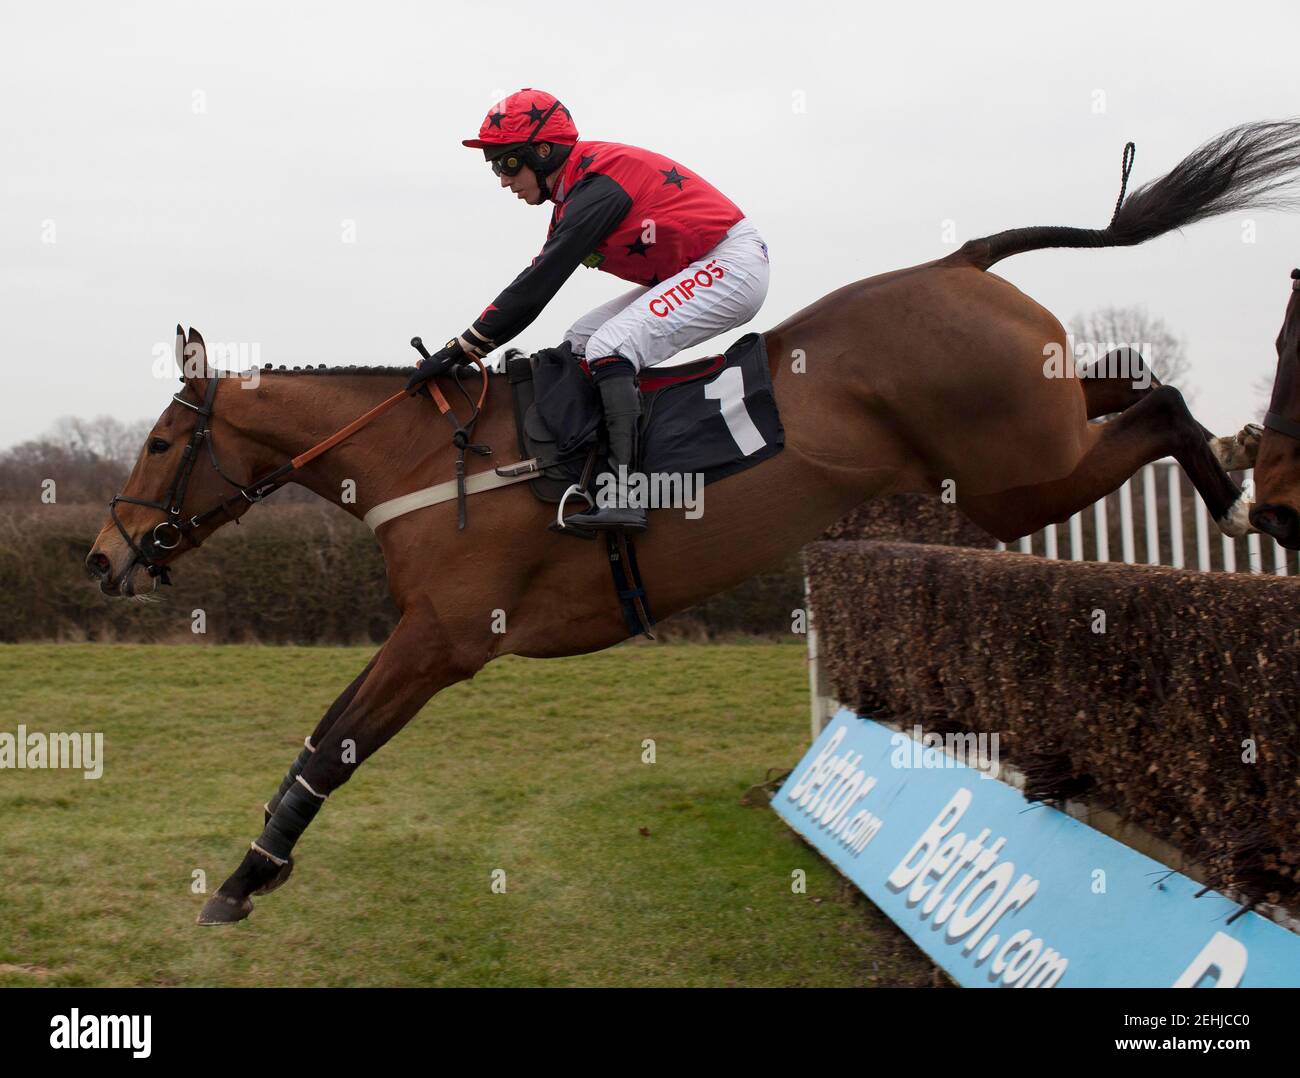 Horse Racing - Plumpton - Plumpton Racecourse - 27/2/12  How's Business ridden by Noel Fehily before winning the 14.45 E.B.F. Thoroughbred Breeders Association Mares' Novices' Steeple Chase  Mandatory Credit: Action Images / Julian Herbert  Livepic Stock Photo